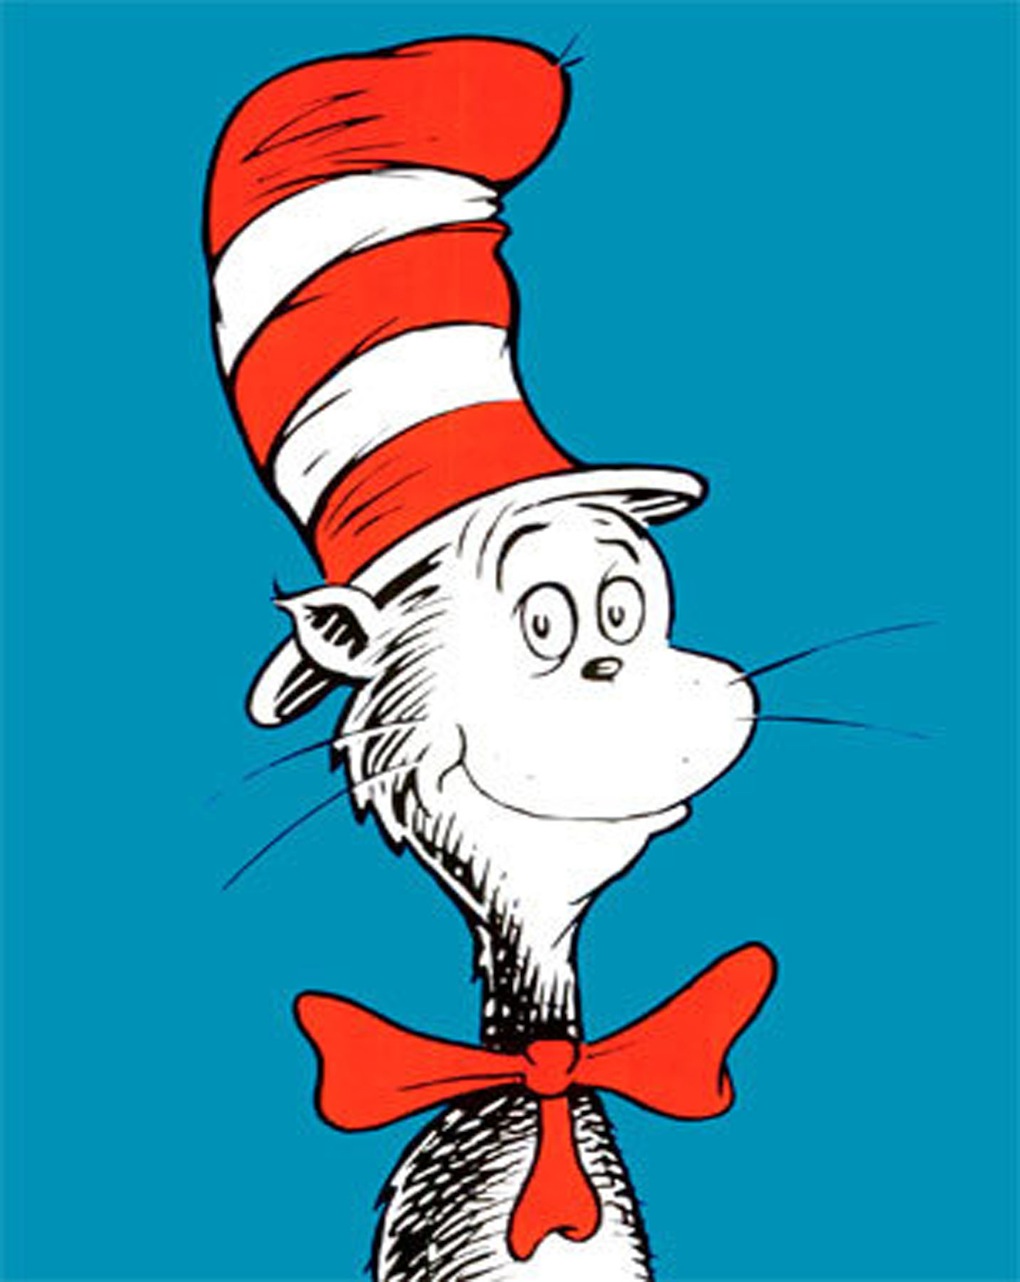 Dr Seuss Author of Green Eggs and Ham